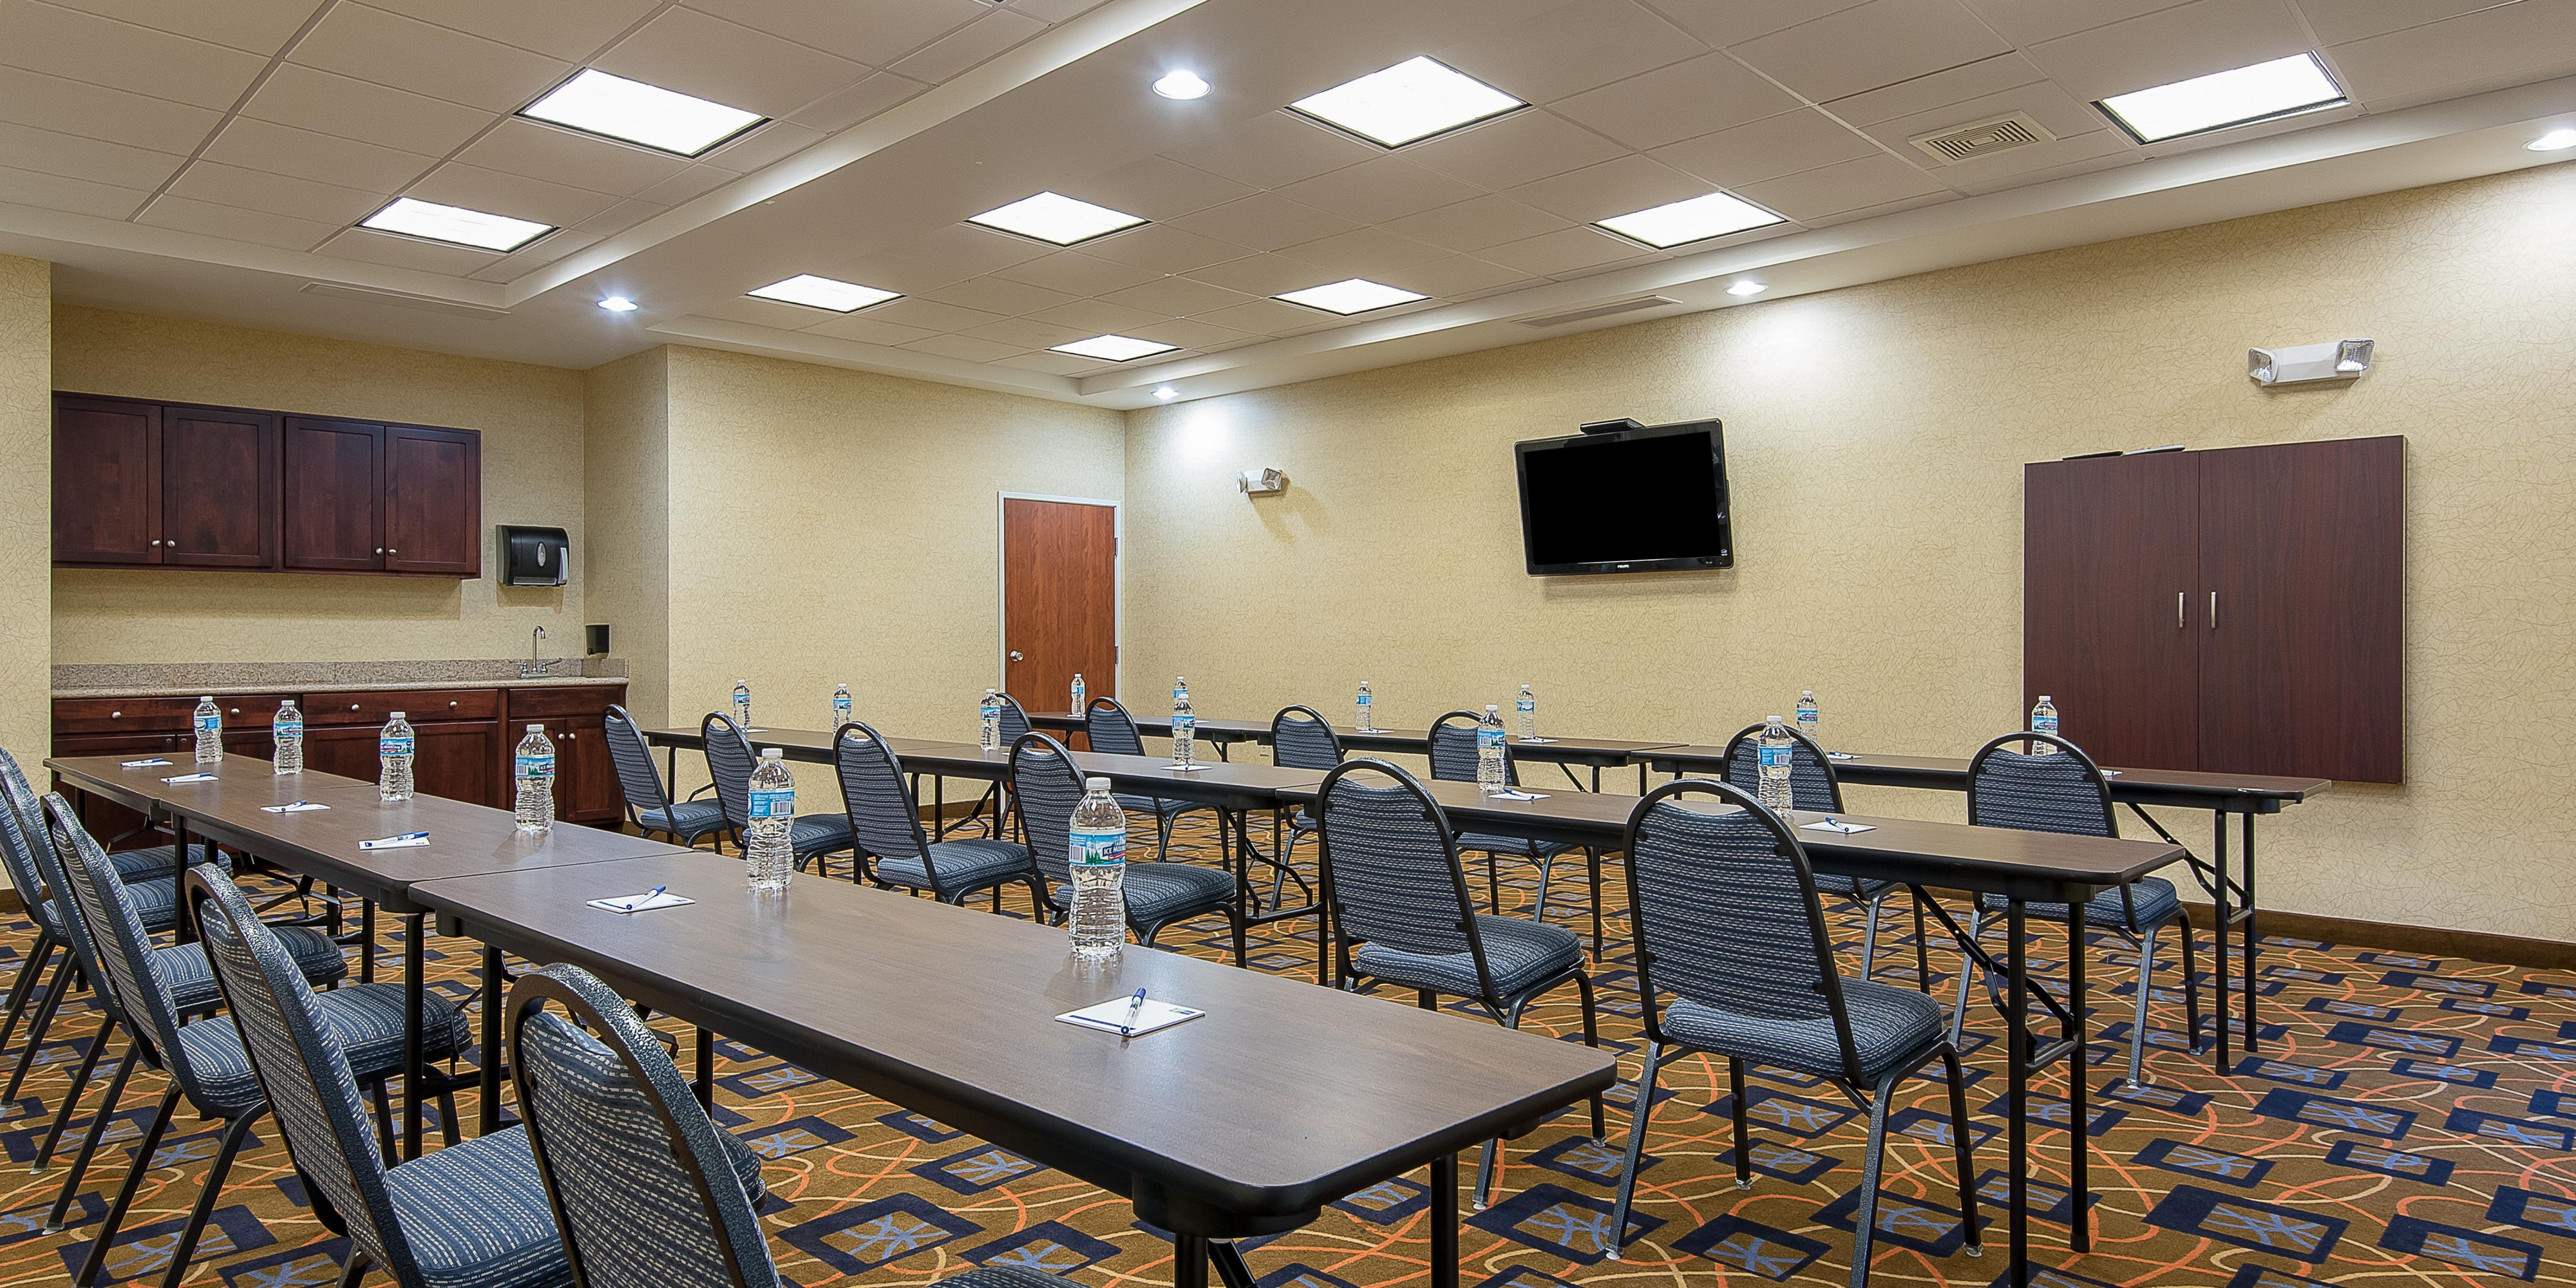 Book our meeting room for your next event.  We are able to accommodate up to 40 people with a variety of seating styles.  Please call us today to check our rates and availability. 